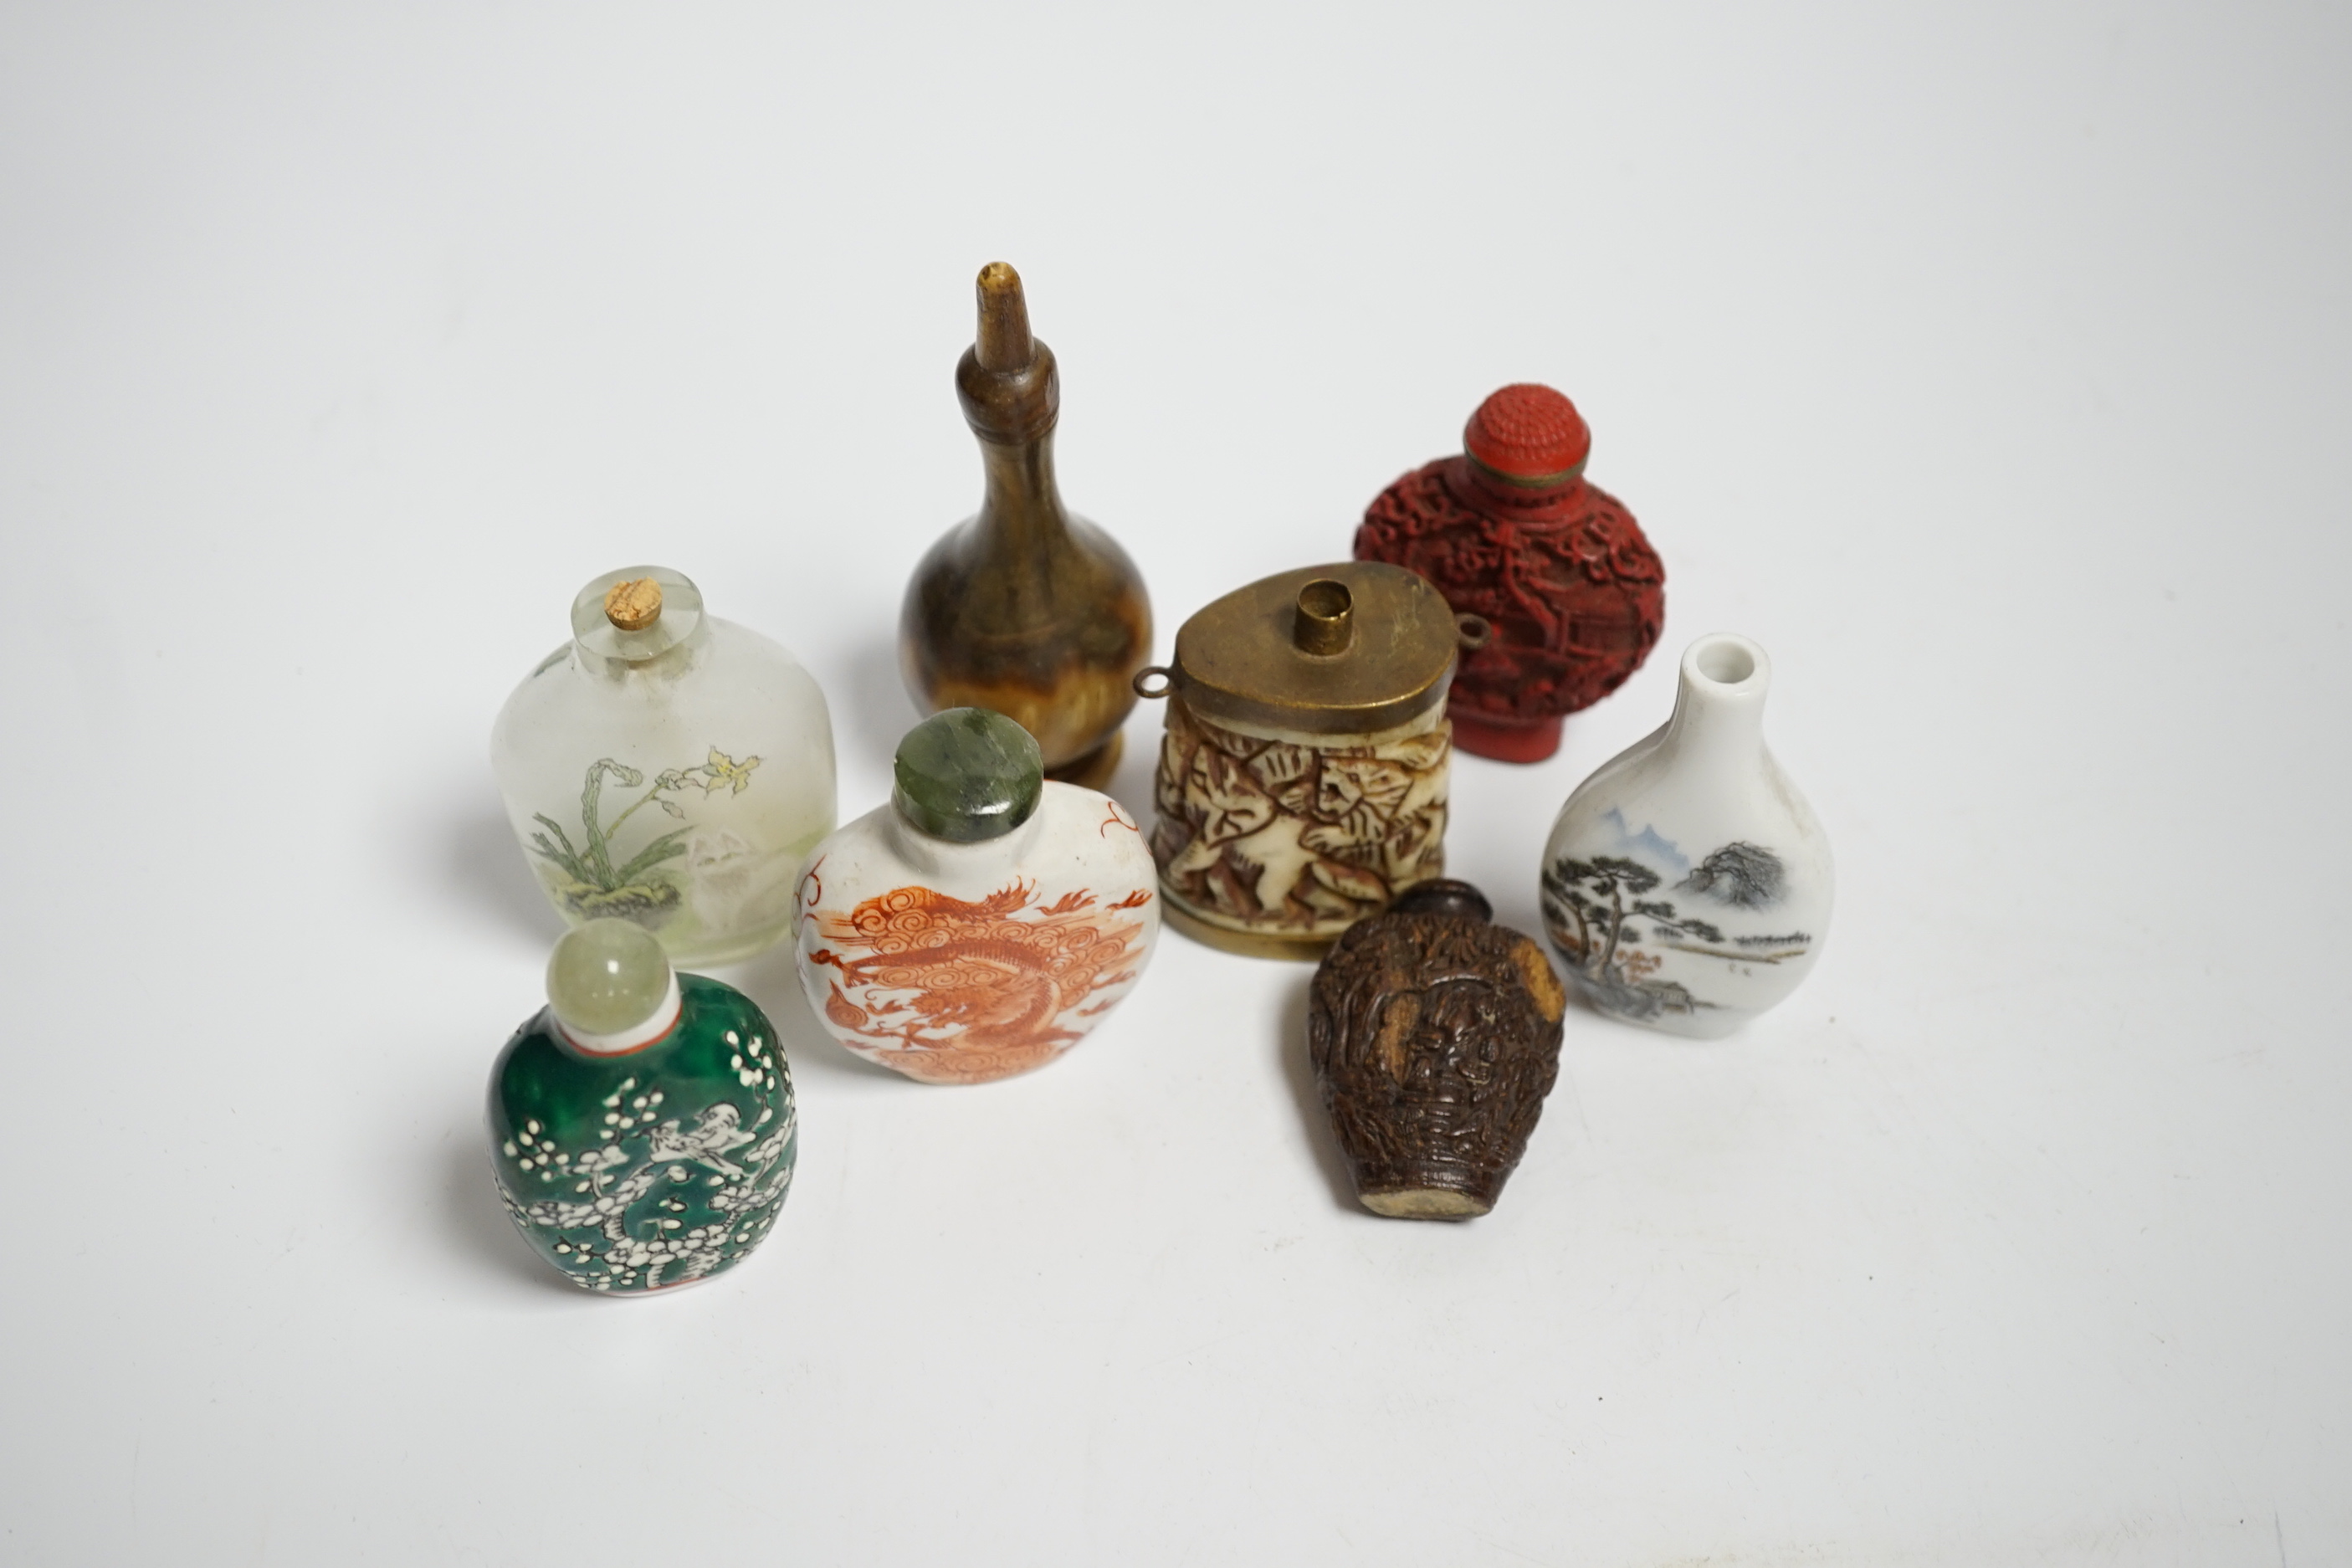 Seven various Chinese snuff bottles including horn, simulated lacquer, porcelain, glass, wood and a small bone powder flask